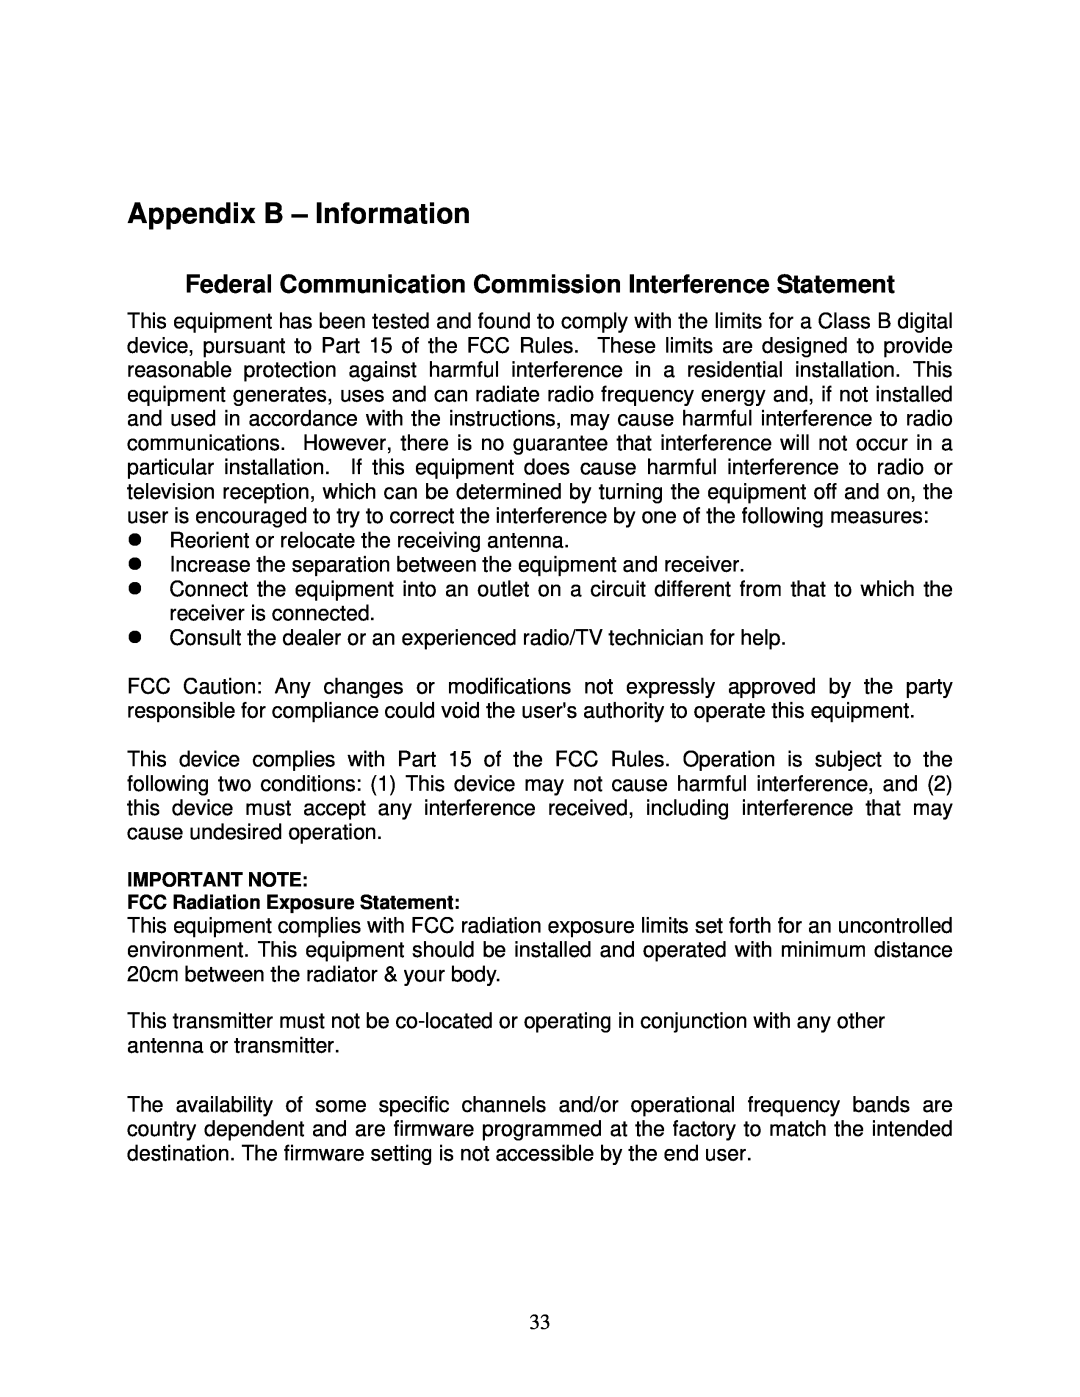 Airlink101 AWLL6070 user manual Appendix B - Information, Federal Communication Commission Interference Statement 